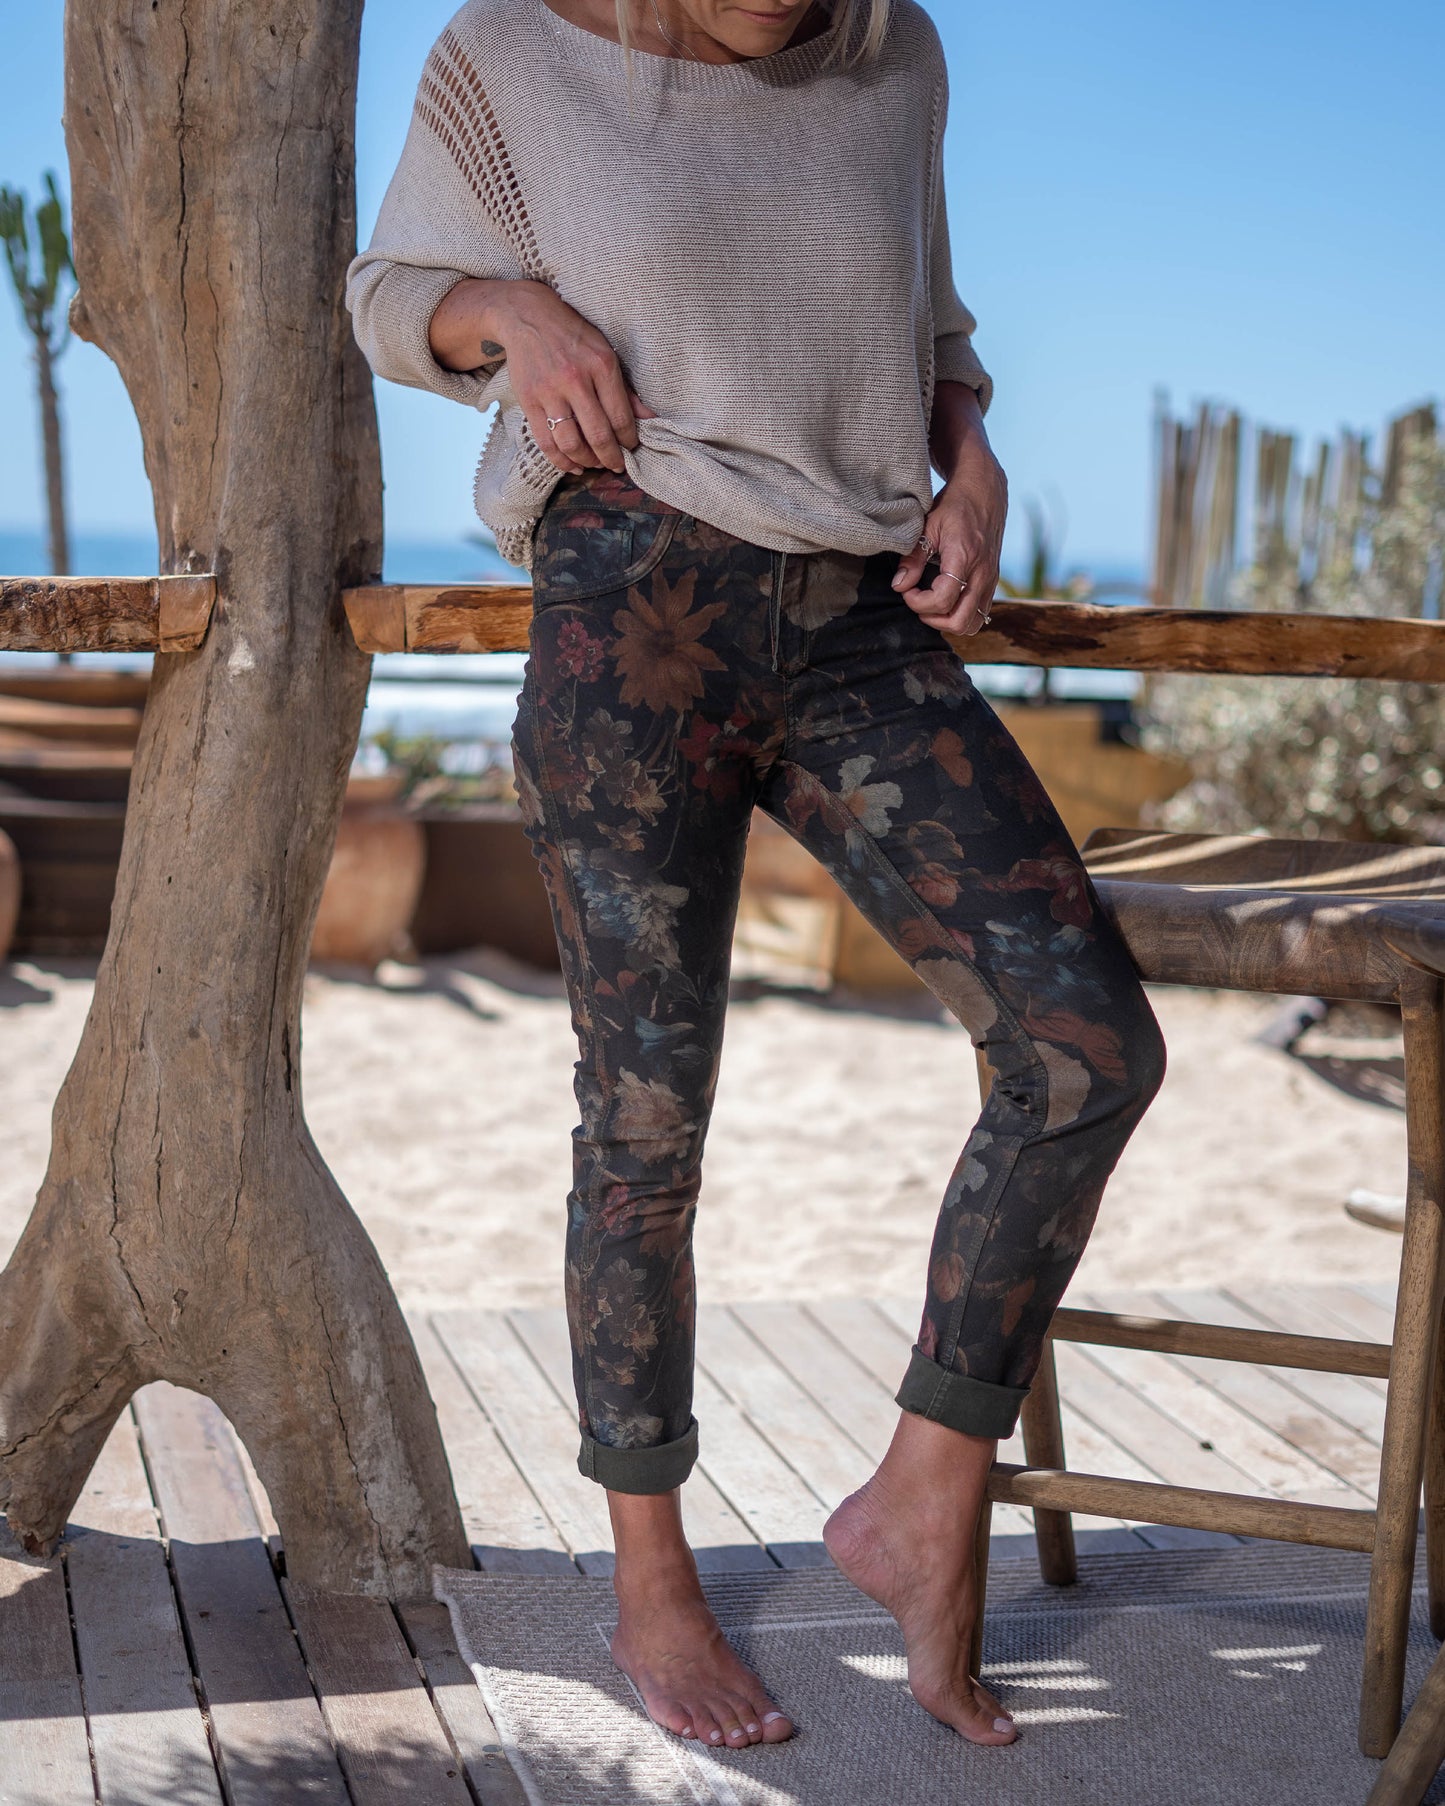 A single pair of jeans that effortlessly transitions from bold floral elegance to sleek block color, ensuring you're always ready for any fashion mood. On one side, embrace the vibrant beauty of nature with our eye-catching floral print. On the flip side, revel in the simplicity and sophistication of the block color design. This jean is a straight cut with a medium cut waistband